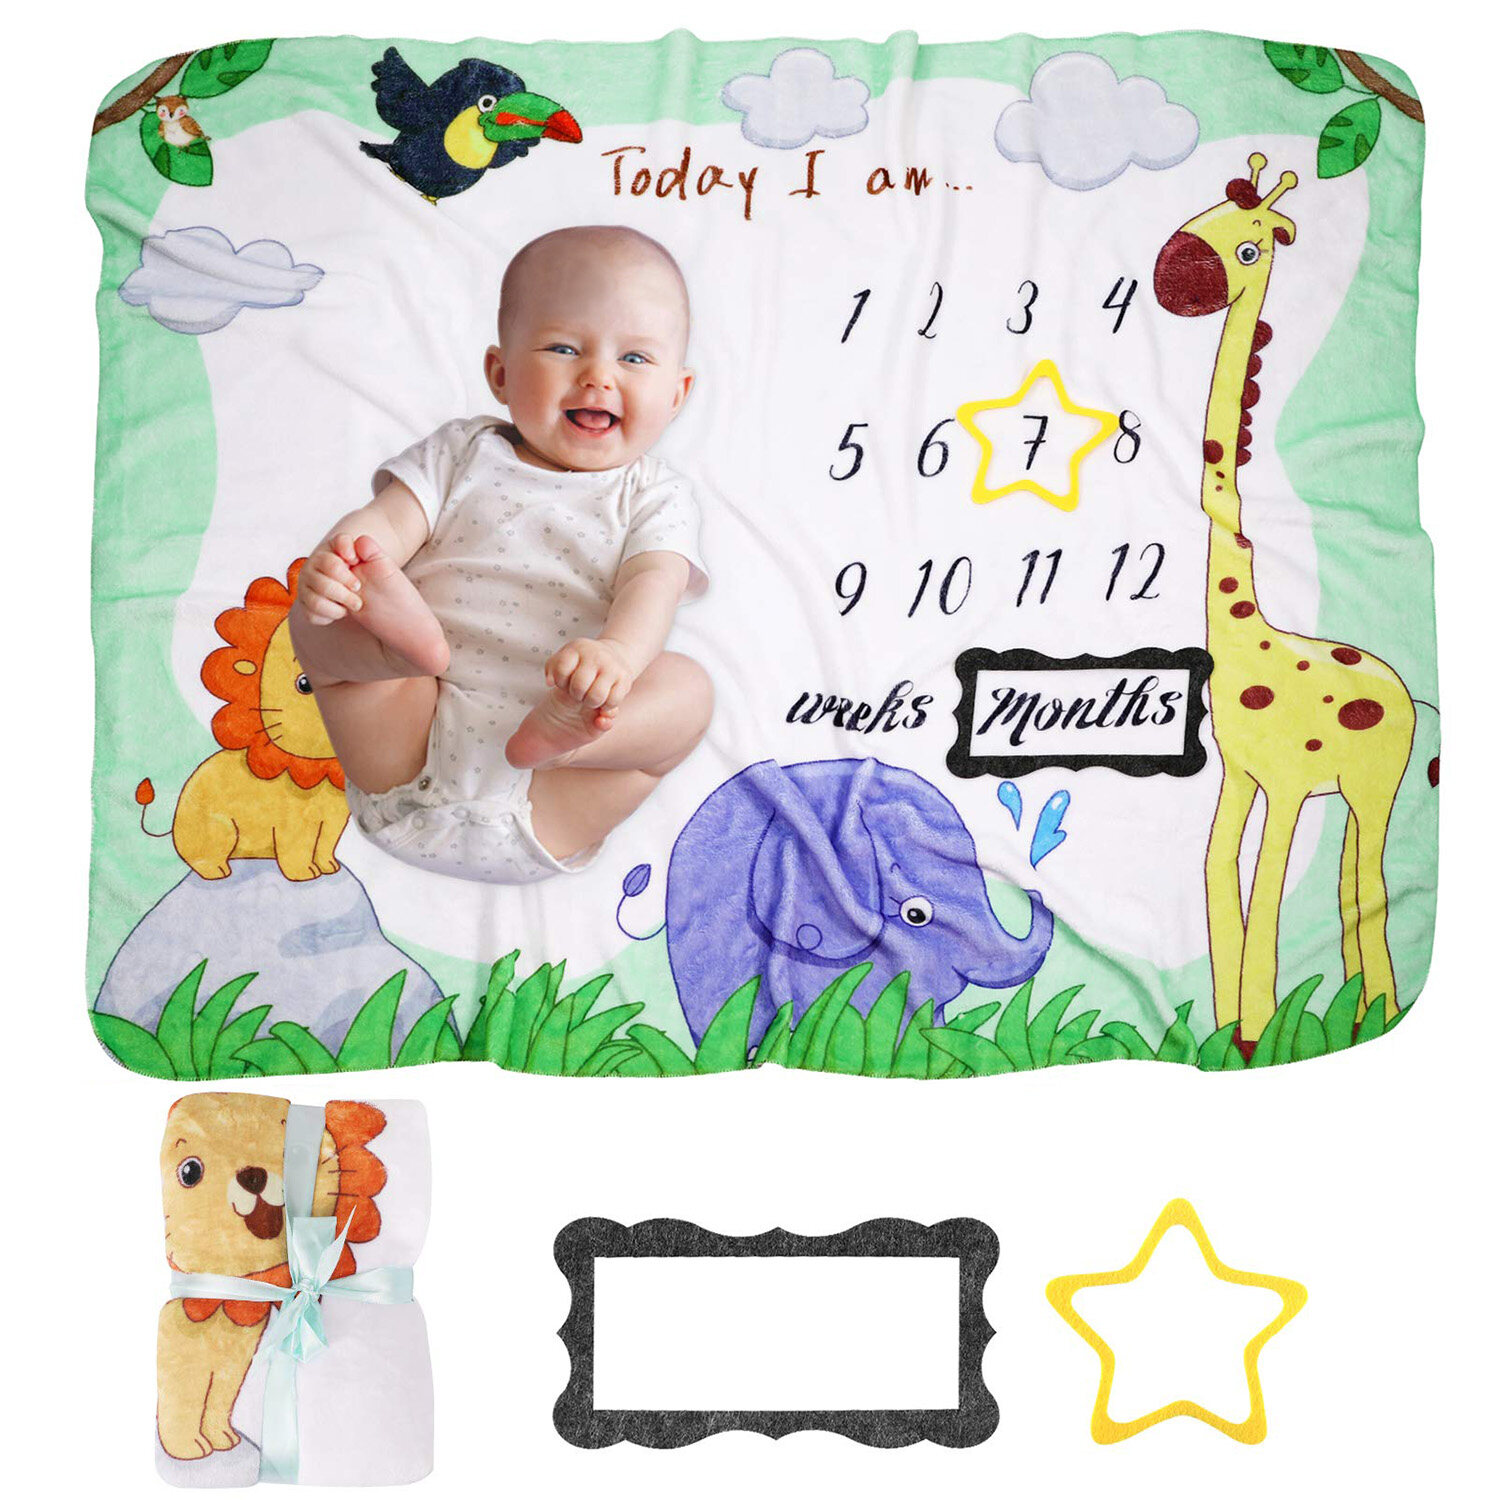 Style A Baby Monthly Milestone Blanket Newborn Infant Babies 0-12 Months Photography Backdrop Photo Prop Baby Shower Gift 